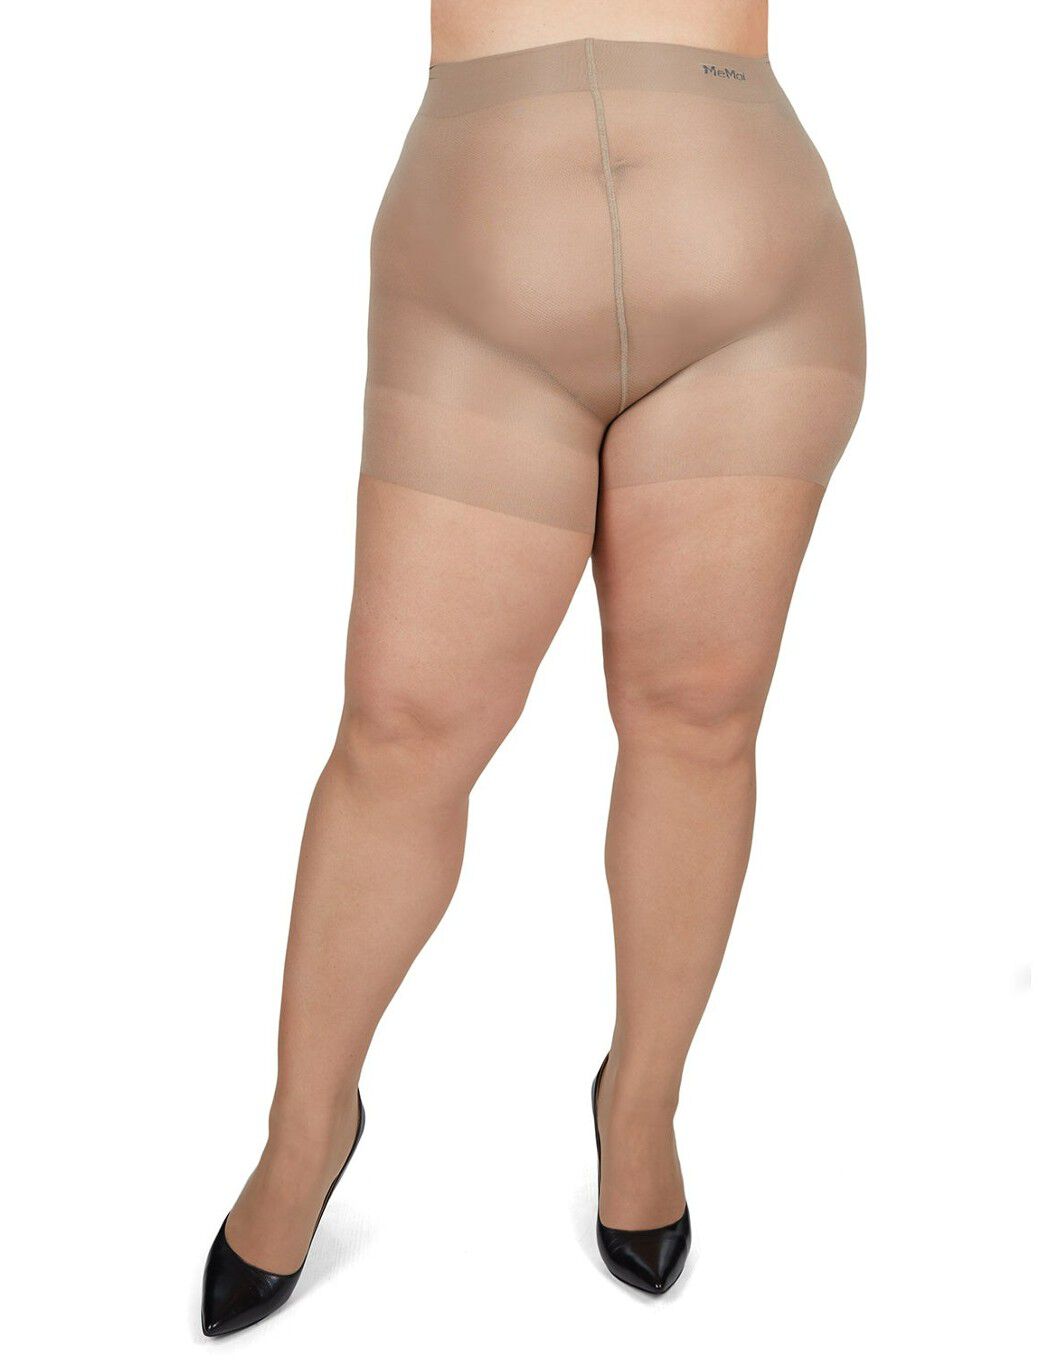 Plus Size Women Memoi Energizing Light Support Control Top Pantyhose By ( Size 14/16 )